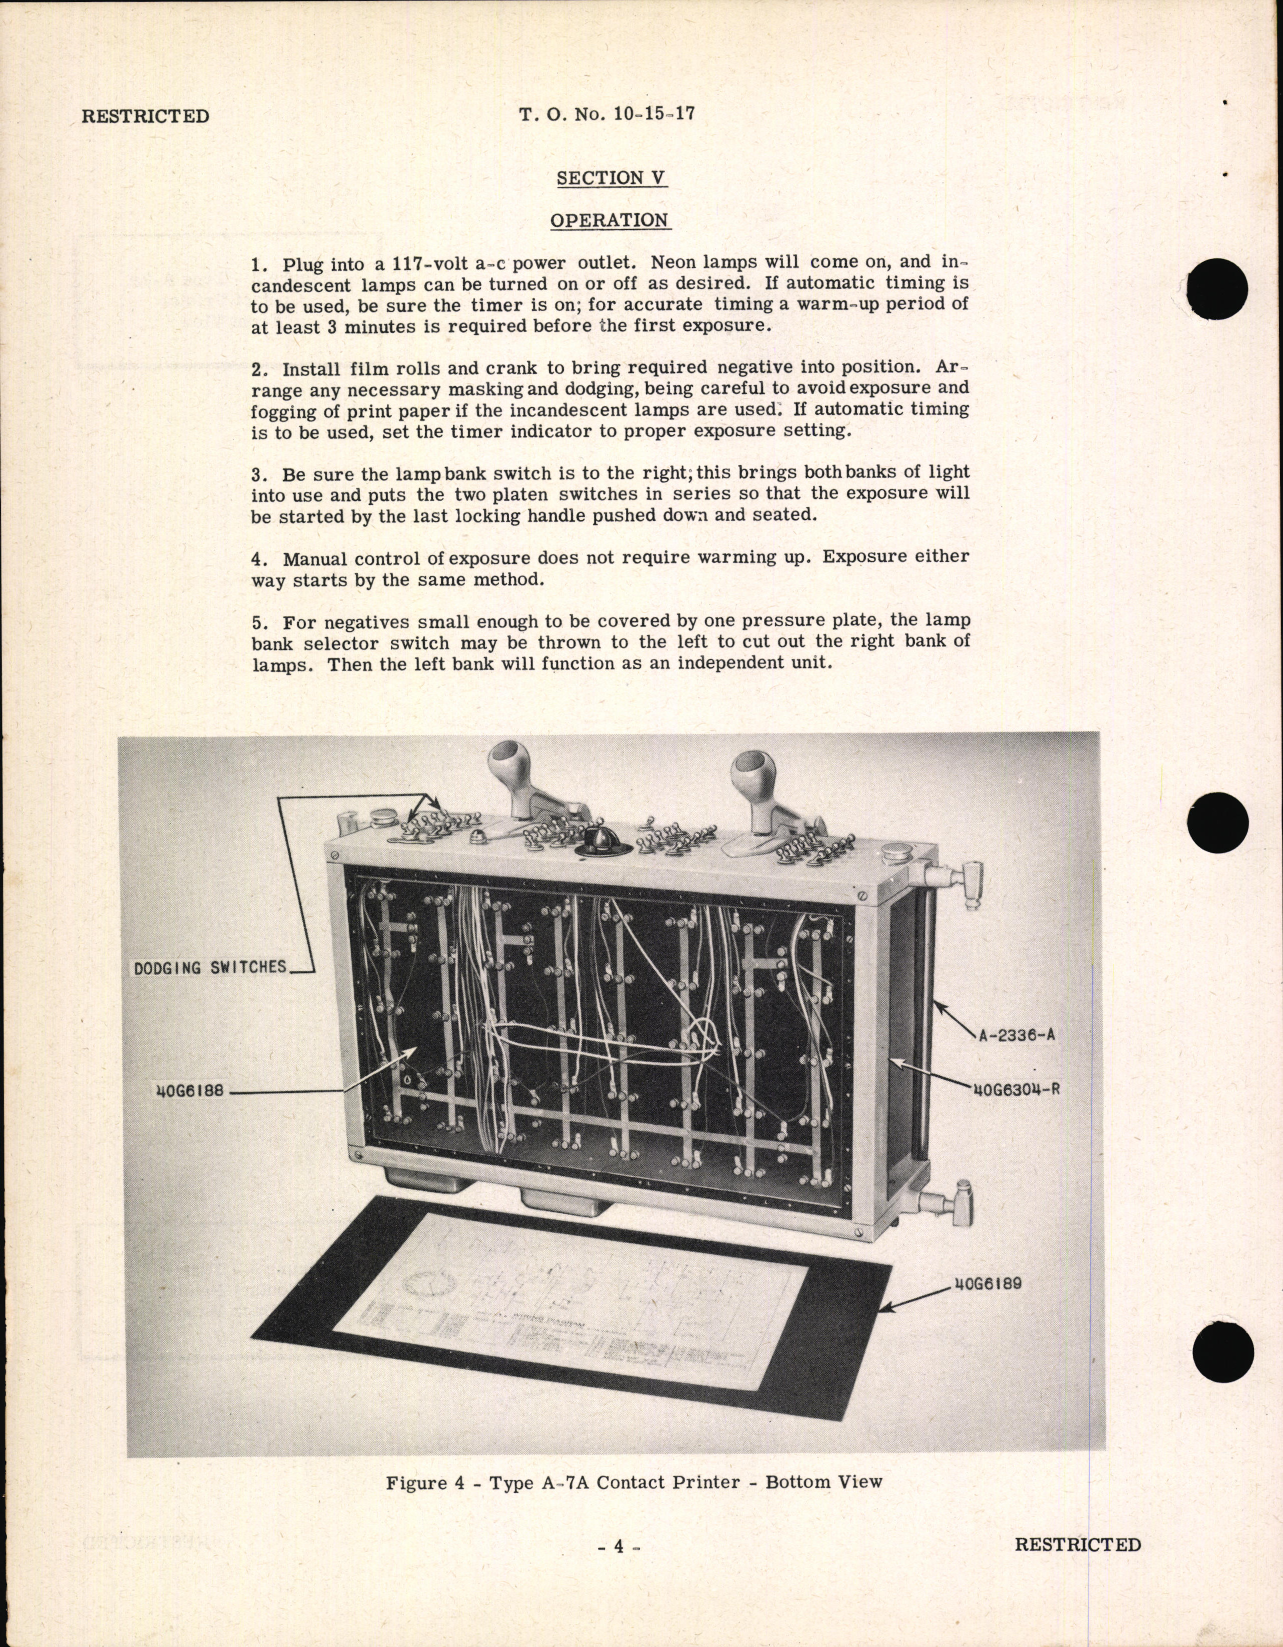 Sample page 8 from AirCorps Library document: Handbook of Instructions with Parts Catalog for Type A-7A Contact Printer